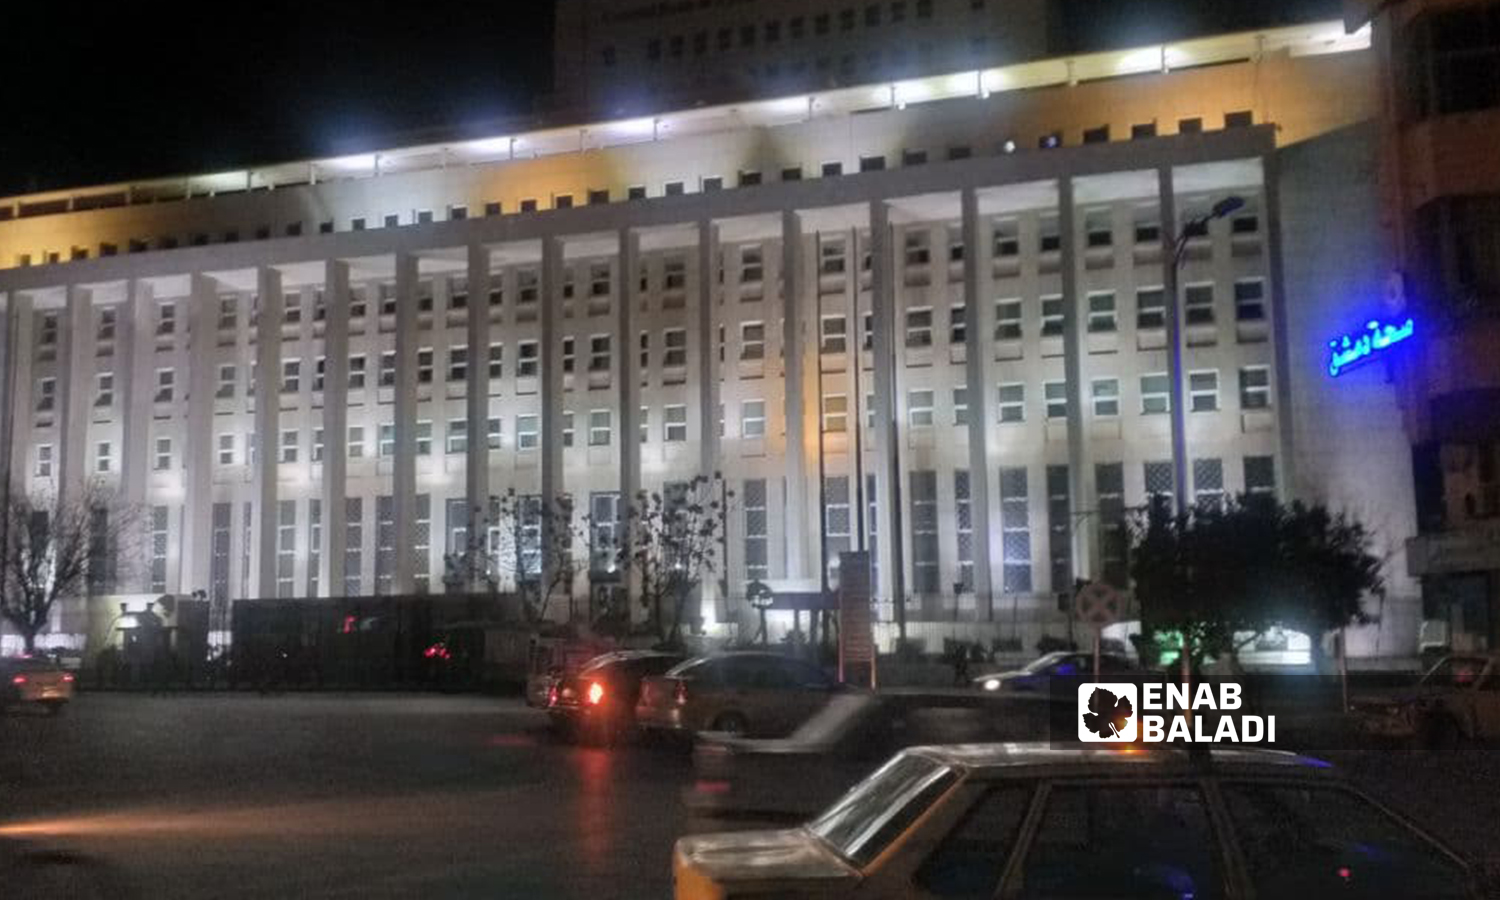 The Central Bank of Syria’s building in Damascus - 23 January 2022 (Enab Baladi / Hassan Hassan)
